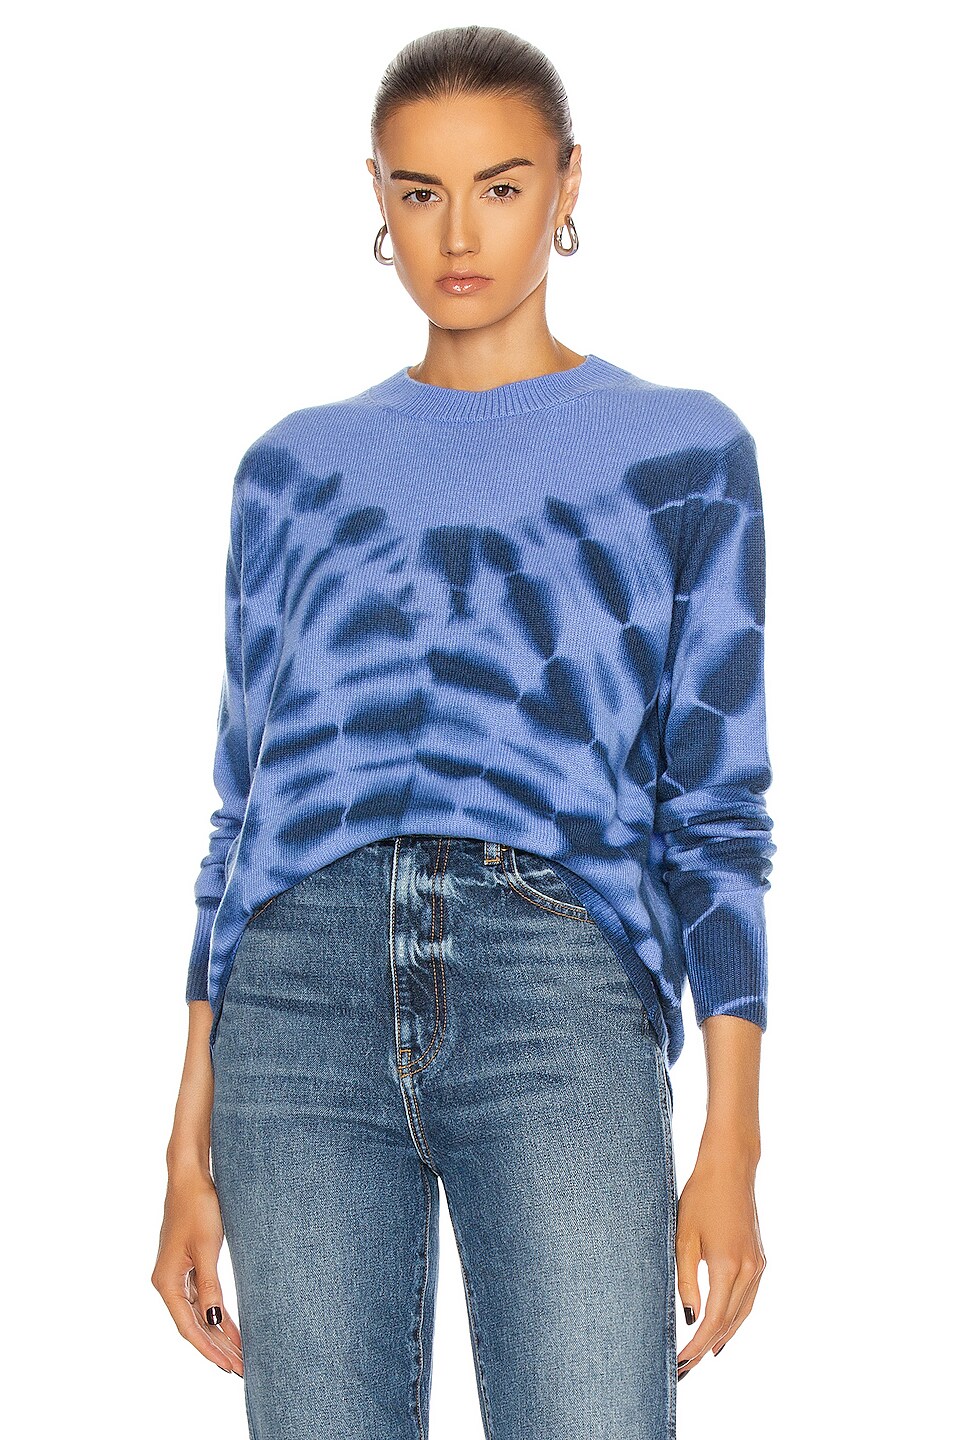 The Elder Statesman Ink Blot Tranquility Crew Sweater in Periwinkle ...